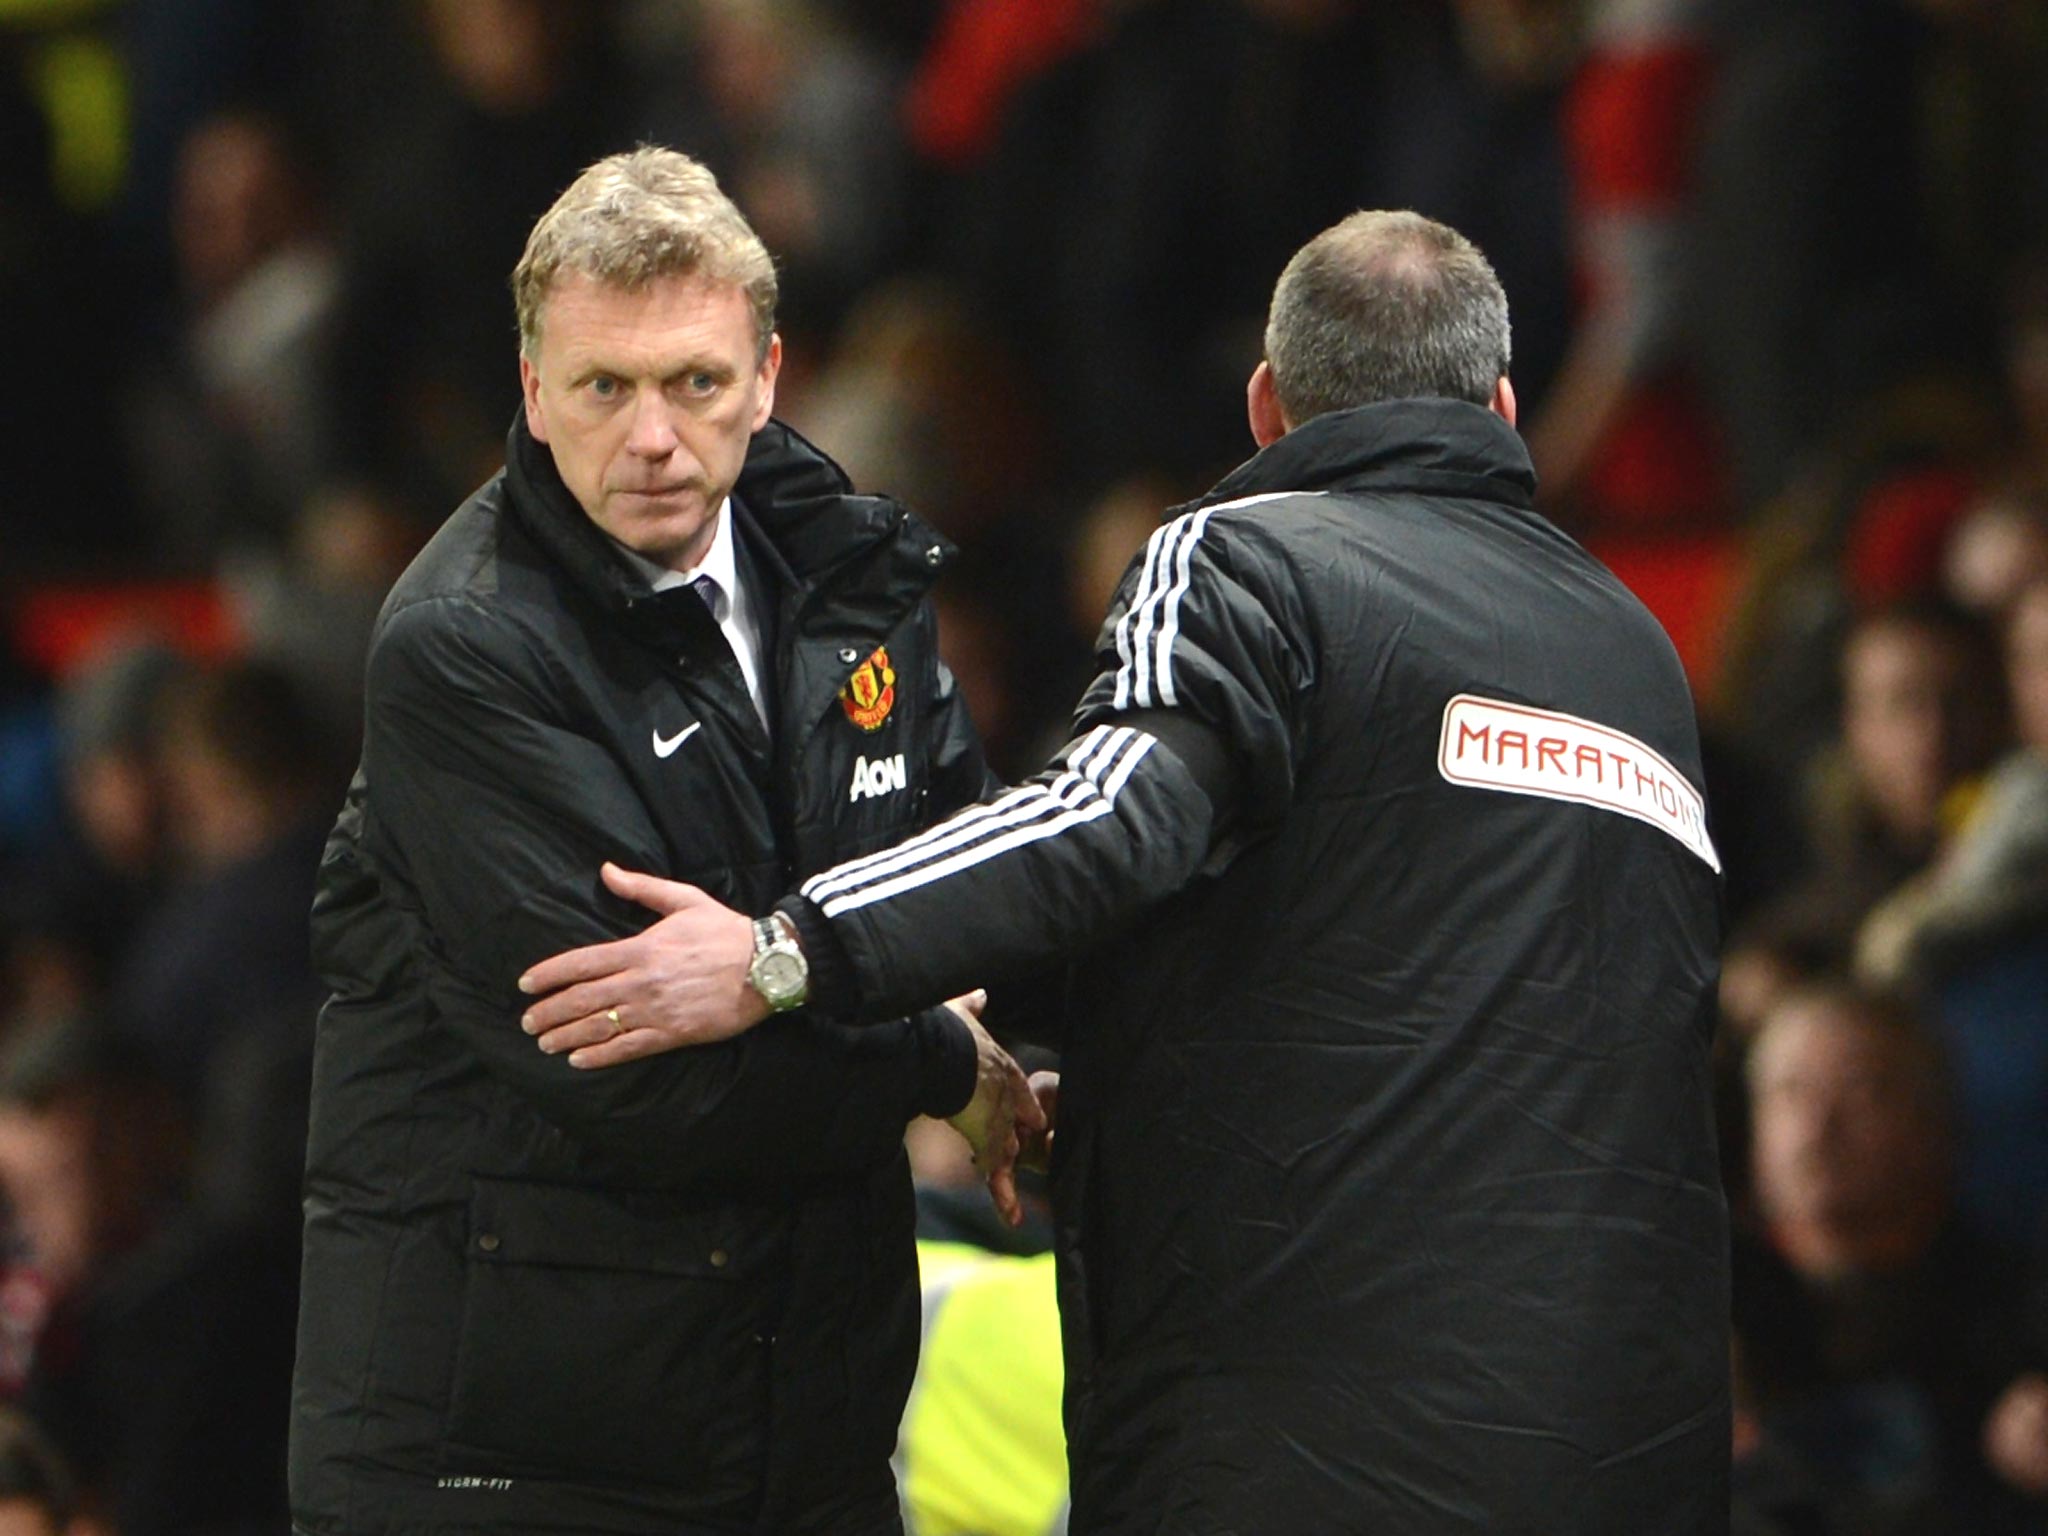 David Moyes (left) shakes hands with Fulham’s Rene Meulensteen
after Sunday’s 2-2 draw at Old Trafford